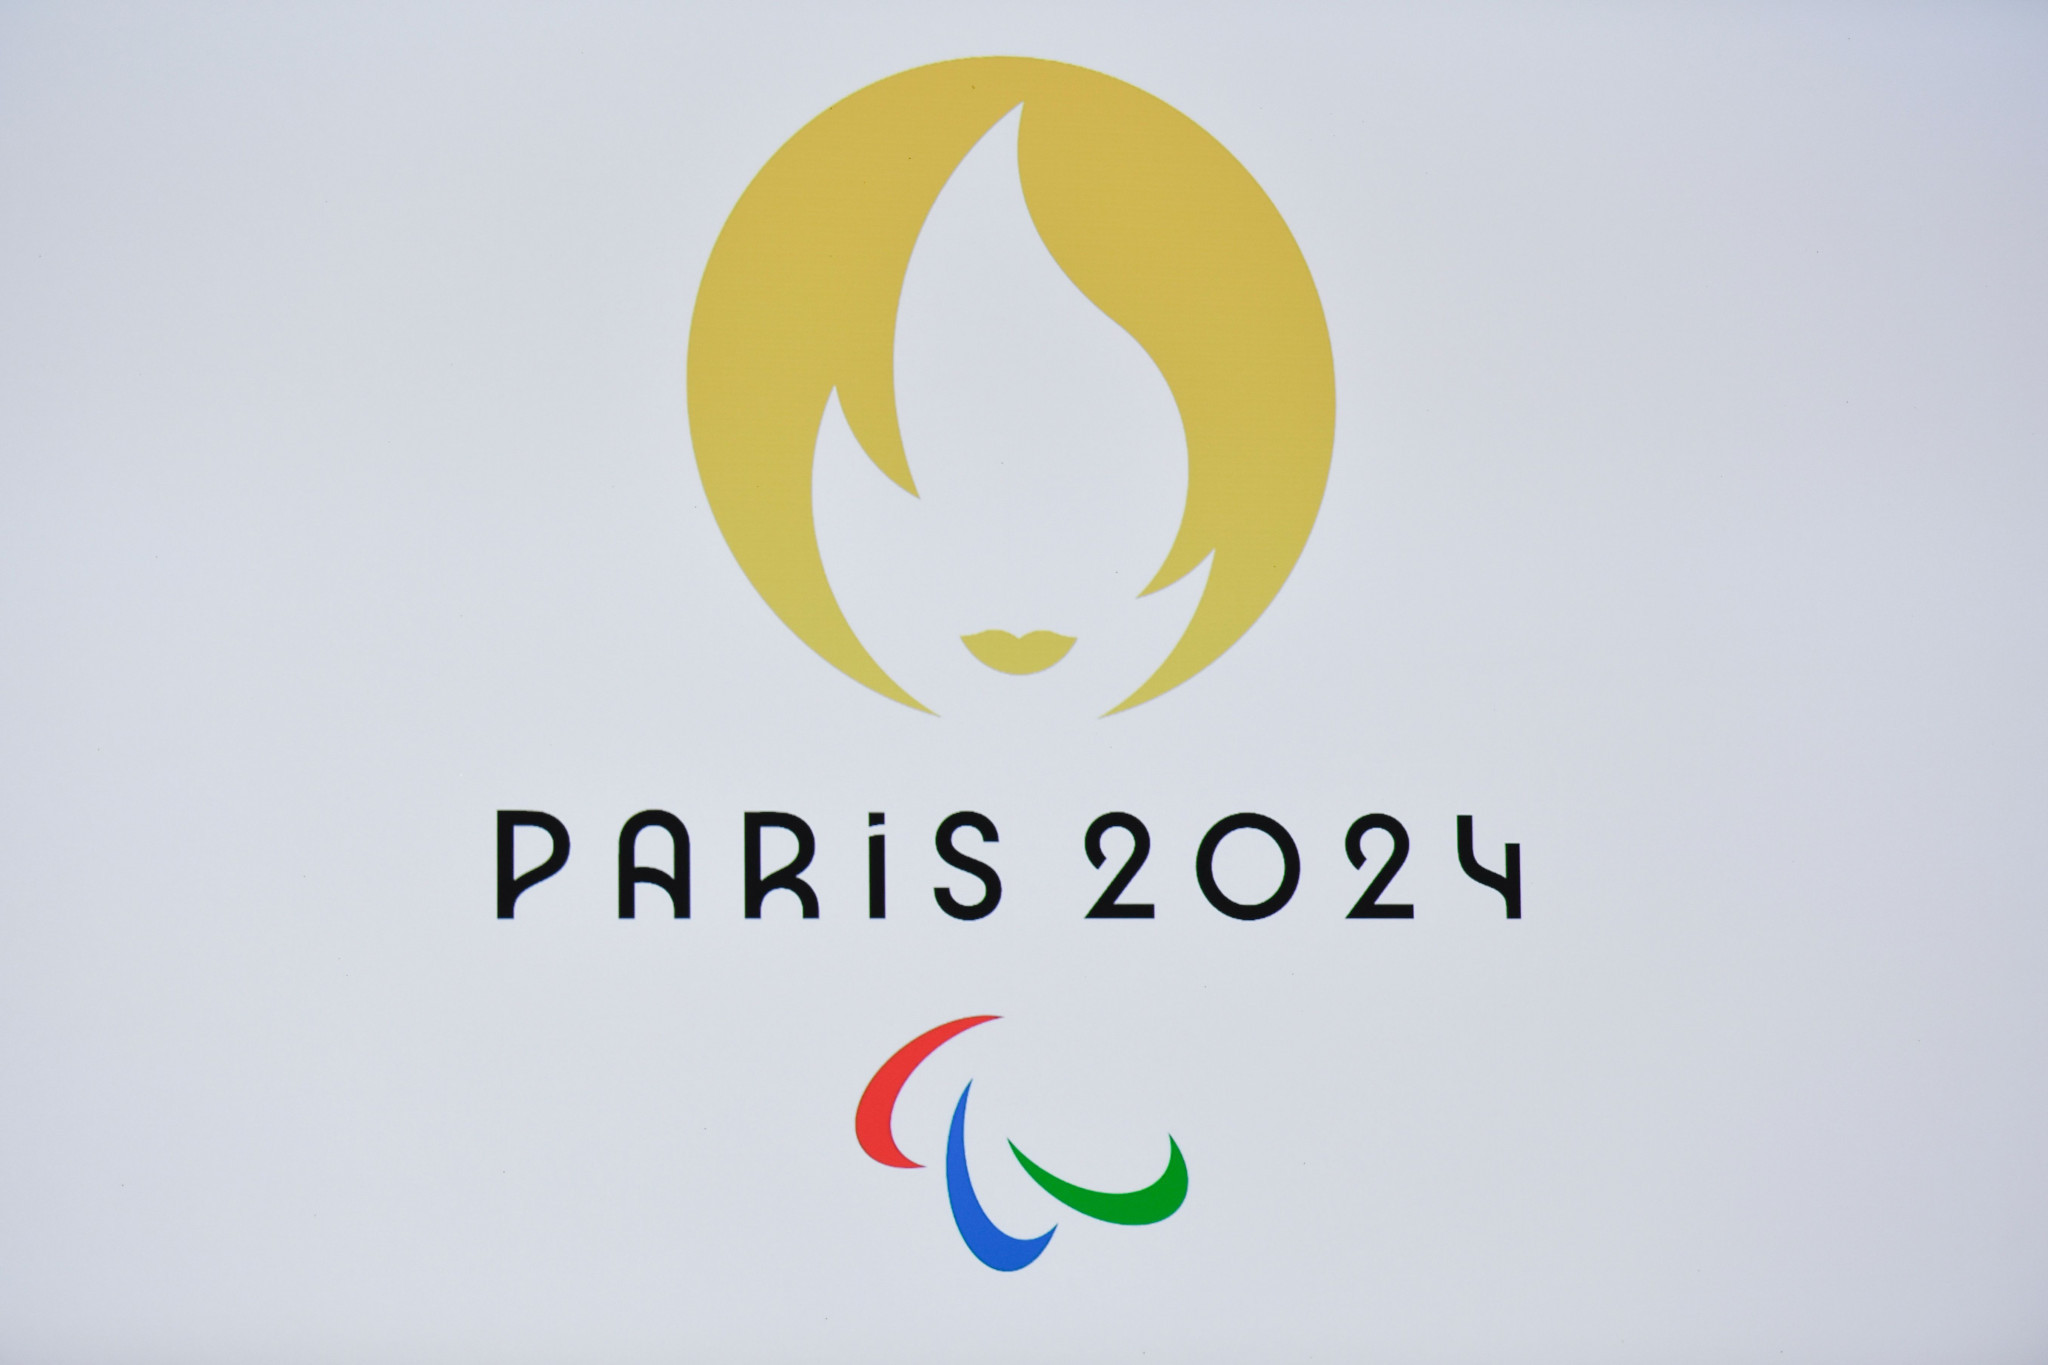 Projects receiving financial support from Paris 2024 heritage programme announced